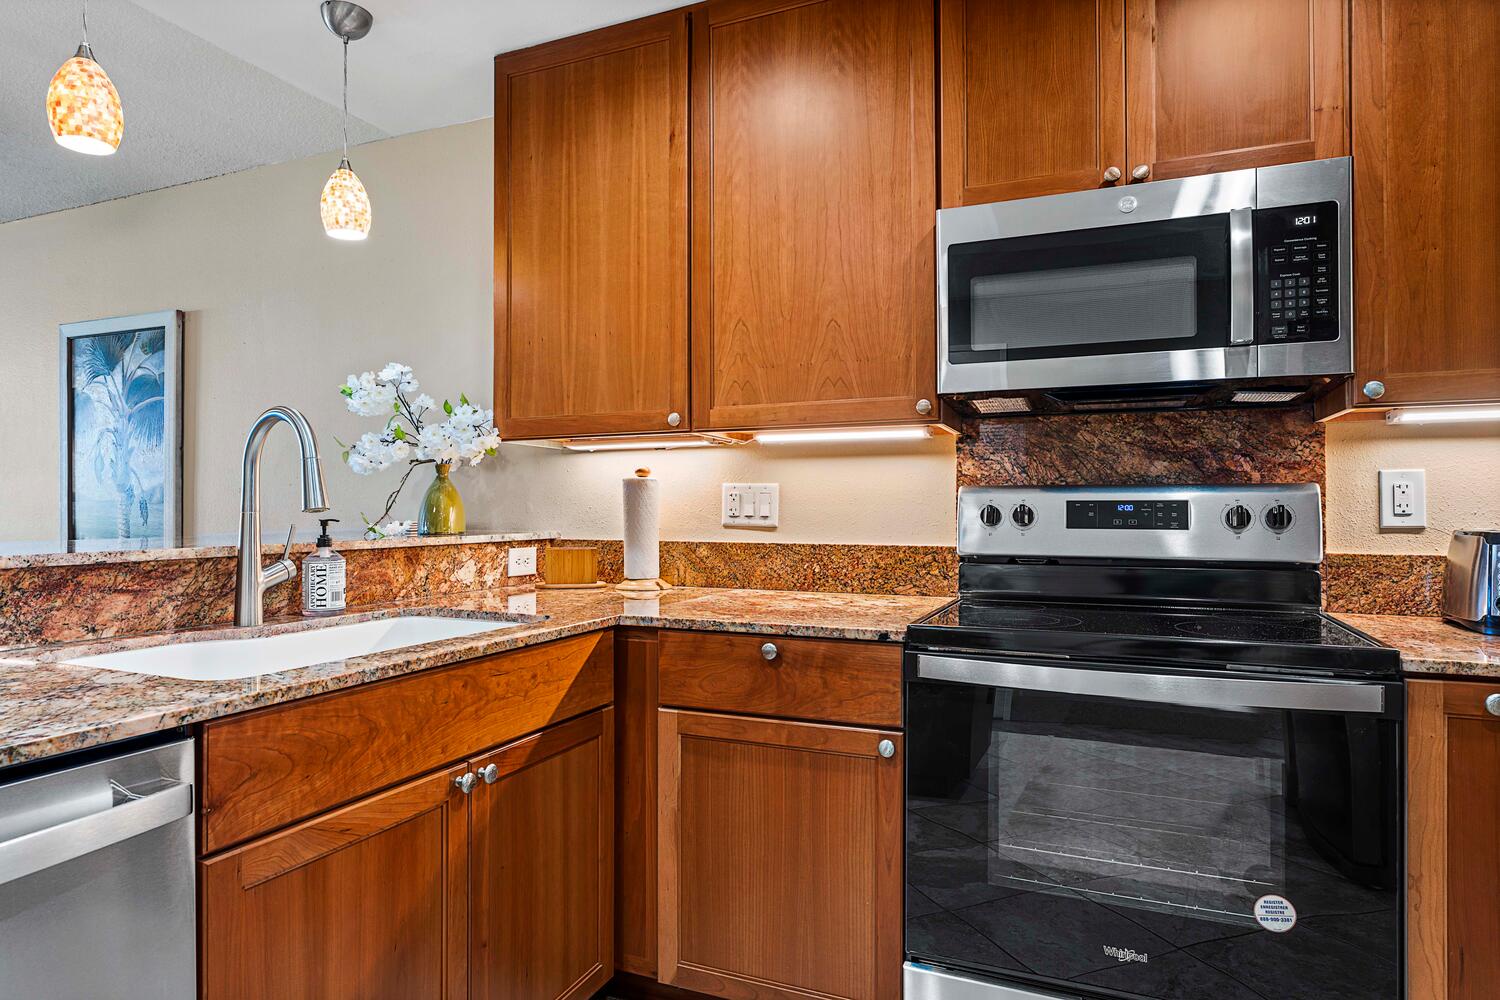 Kailua Kona Vacation Rentals, Keauhou Kona Surf & Racquet 1104 - Complete with cooking tools and appliances for your culinary desires